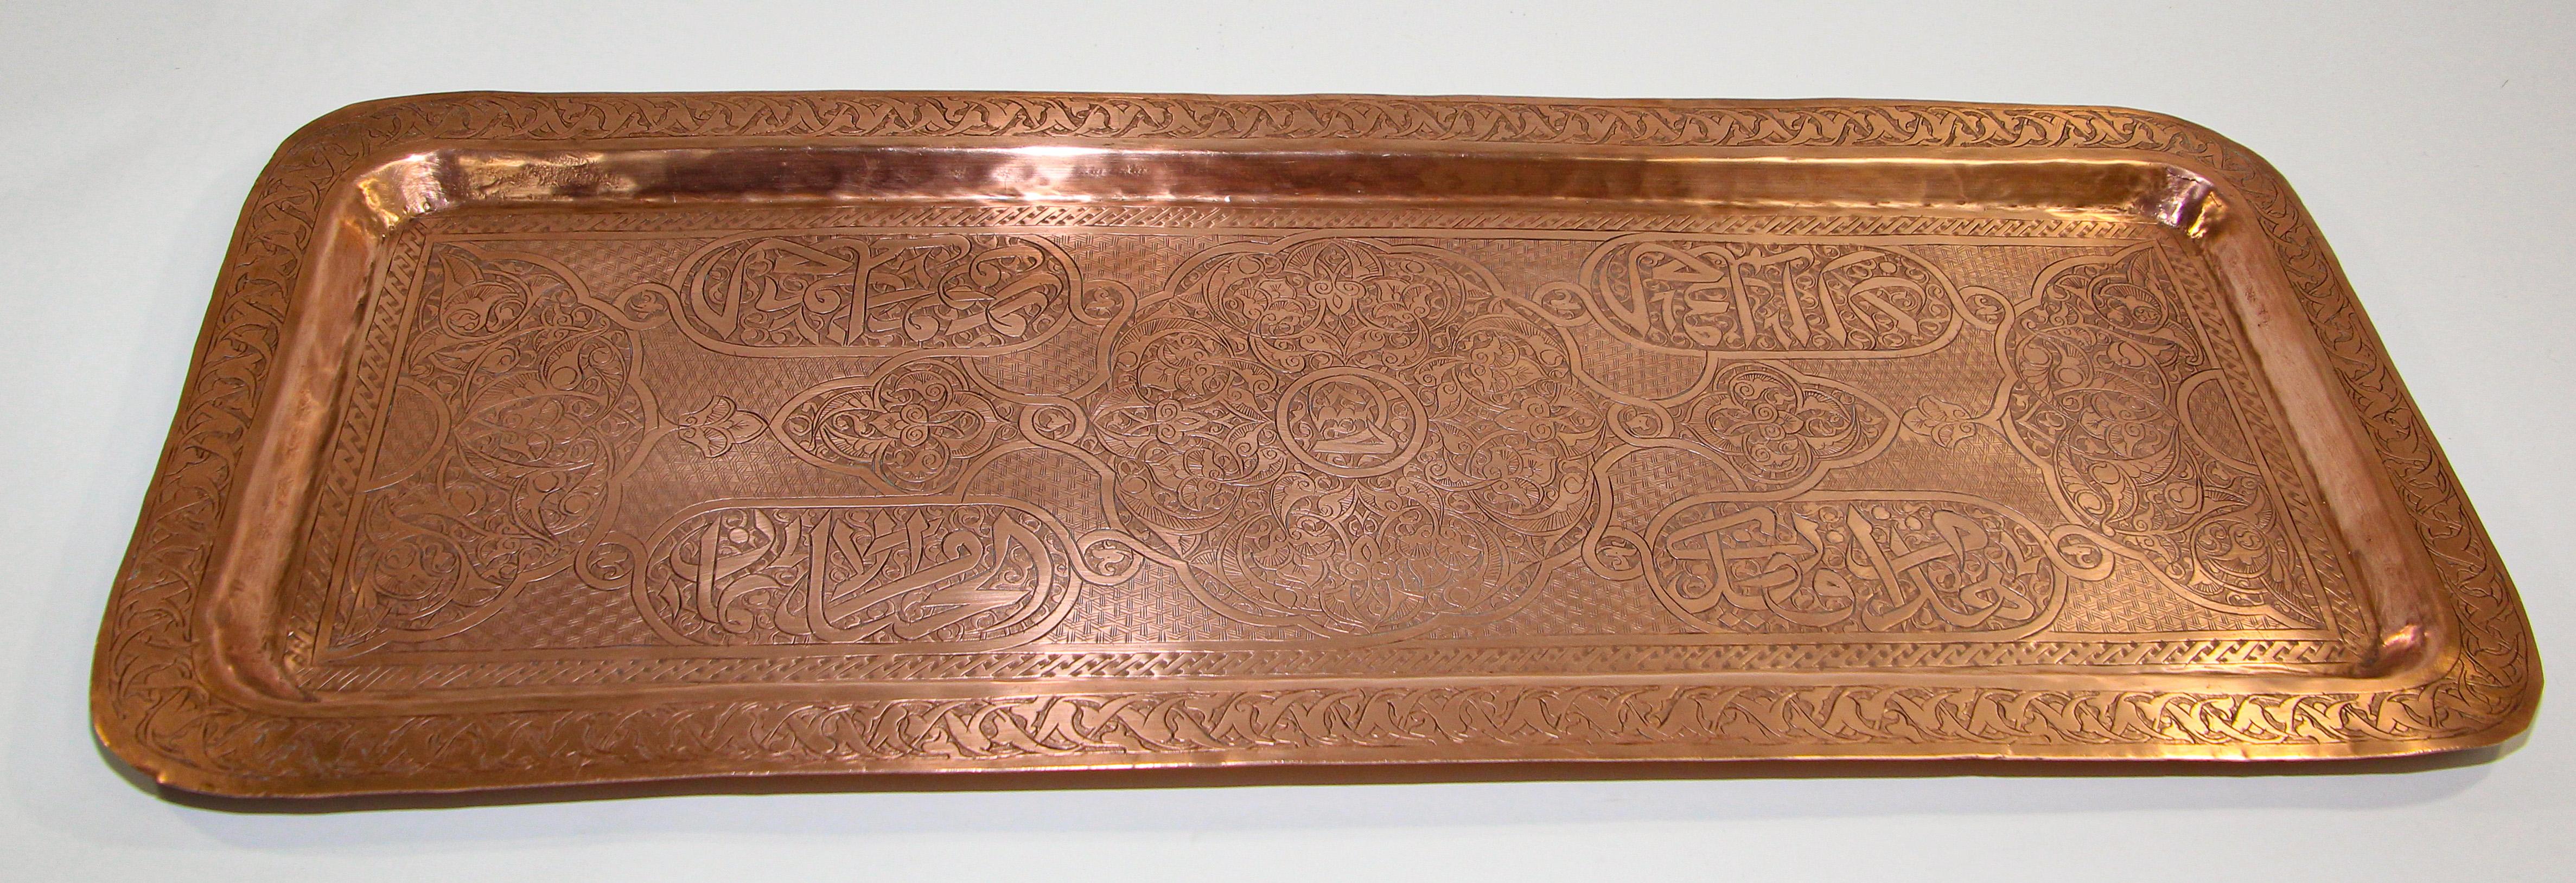 Antique Mamluk revival Indo Persian Damascene Islamic Middle Eastern Arabic copper tray charger.
Solid hammered copper rectangular serving tray platter engraved and finely decorated with Moorish geometric fine etched designs.
Antique Persian